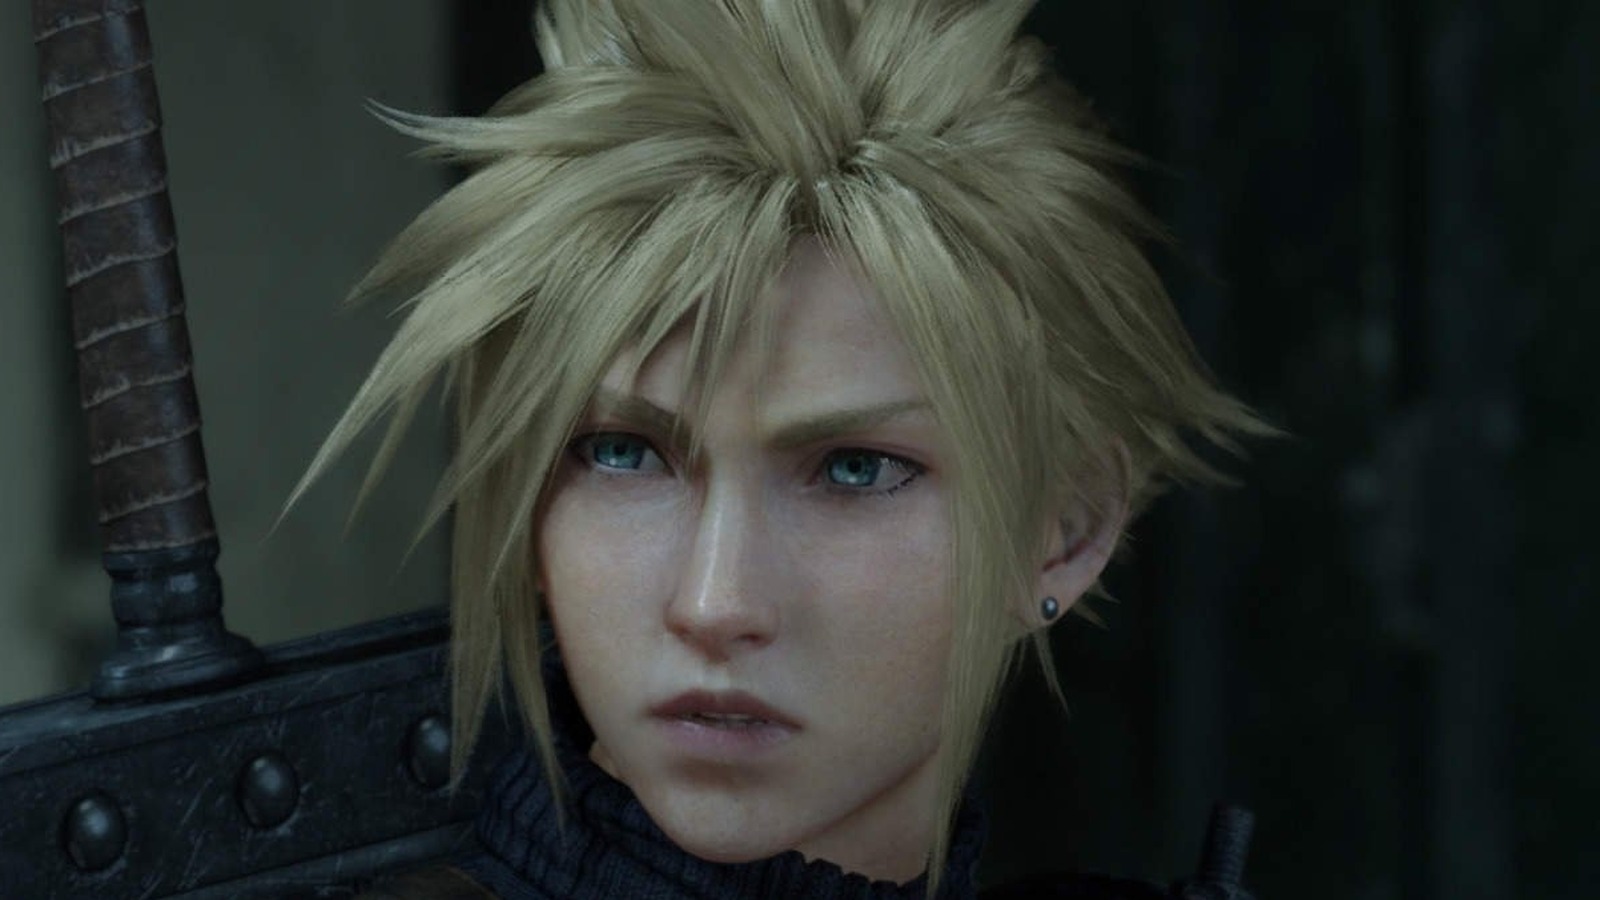 Final Fantasy 7 Remake Part 2 may contain iconic scene